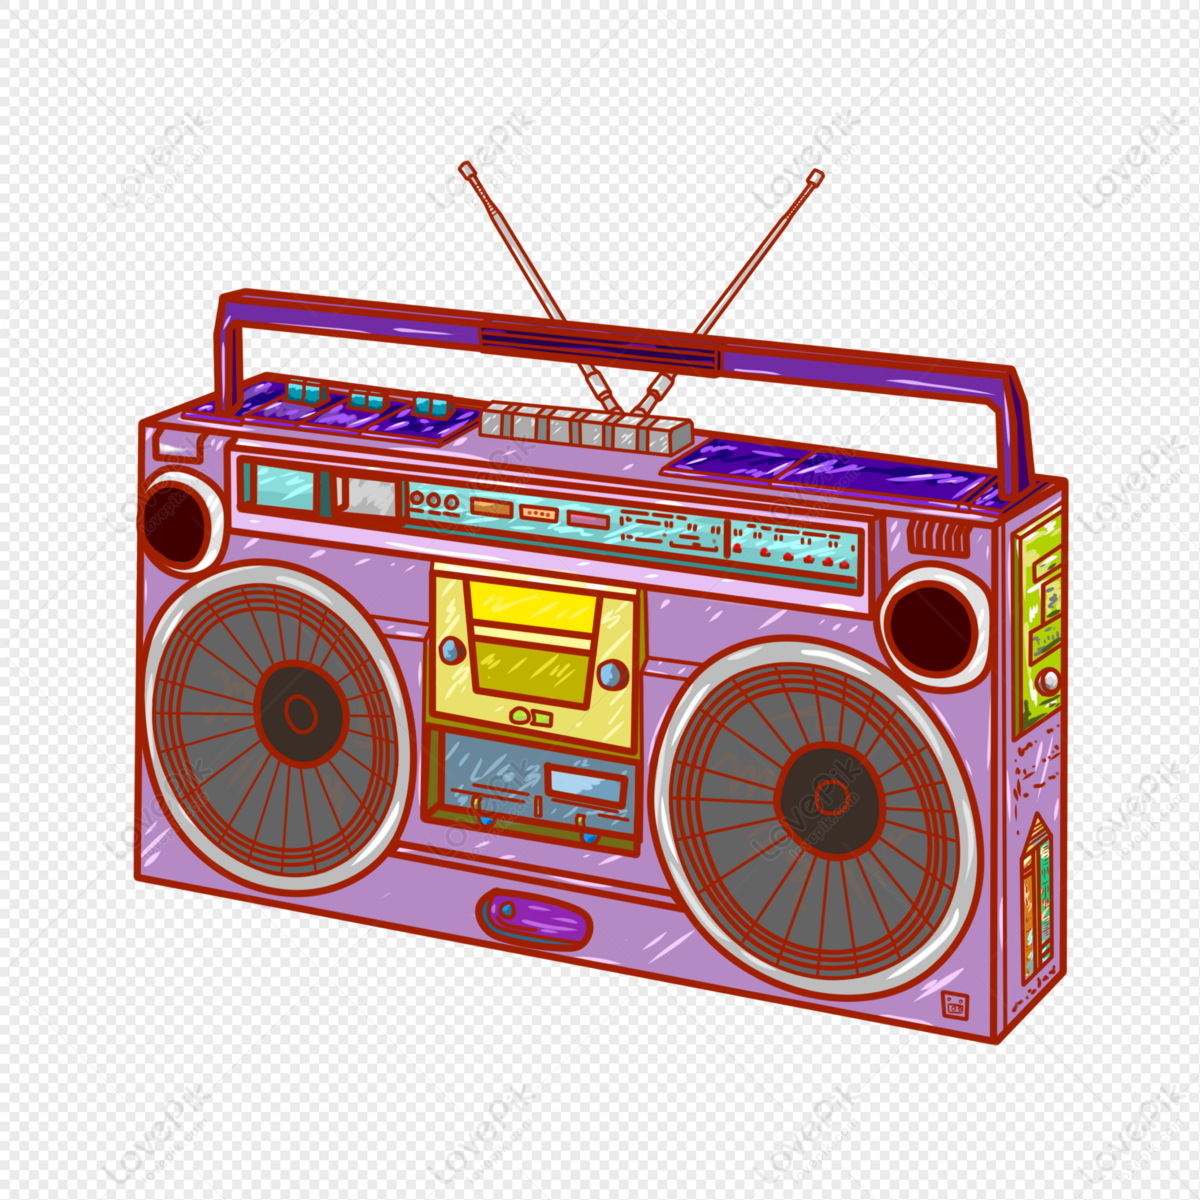 Radio Picture PNG Images With Transparent Background On